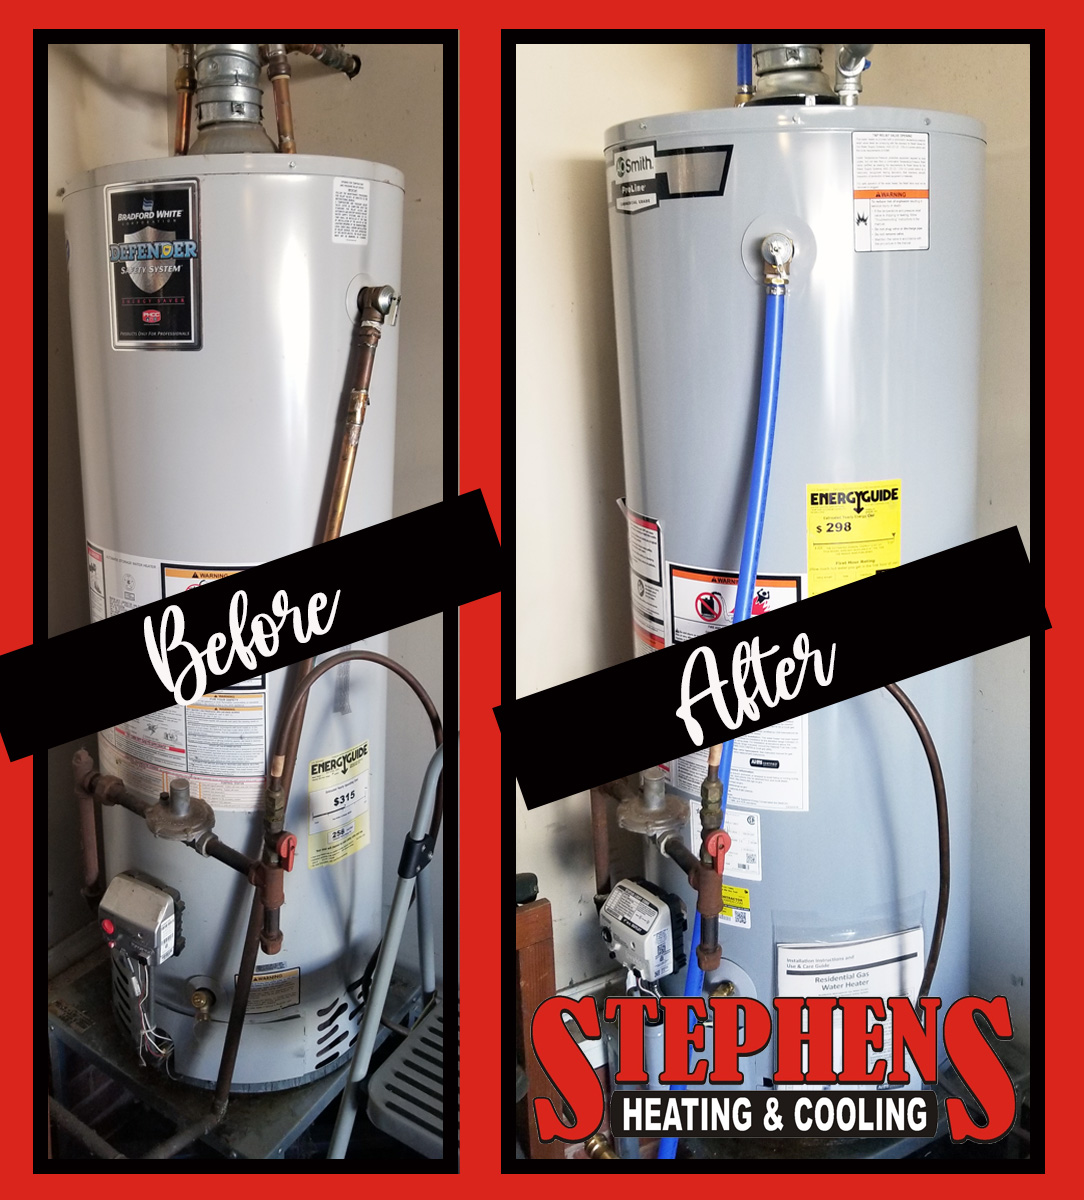 https://www.stephensheatingcooling.com/fbm-data/images/Projects/water_heater_before_and_after_2021.jpg